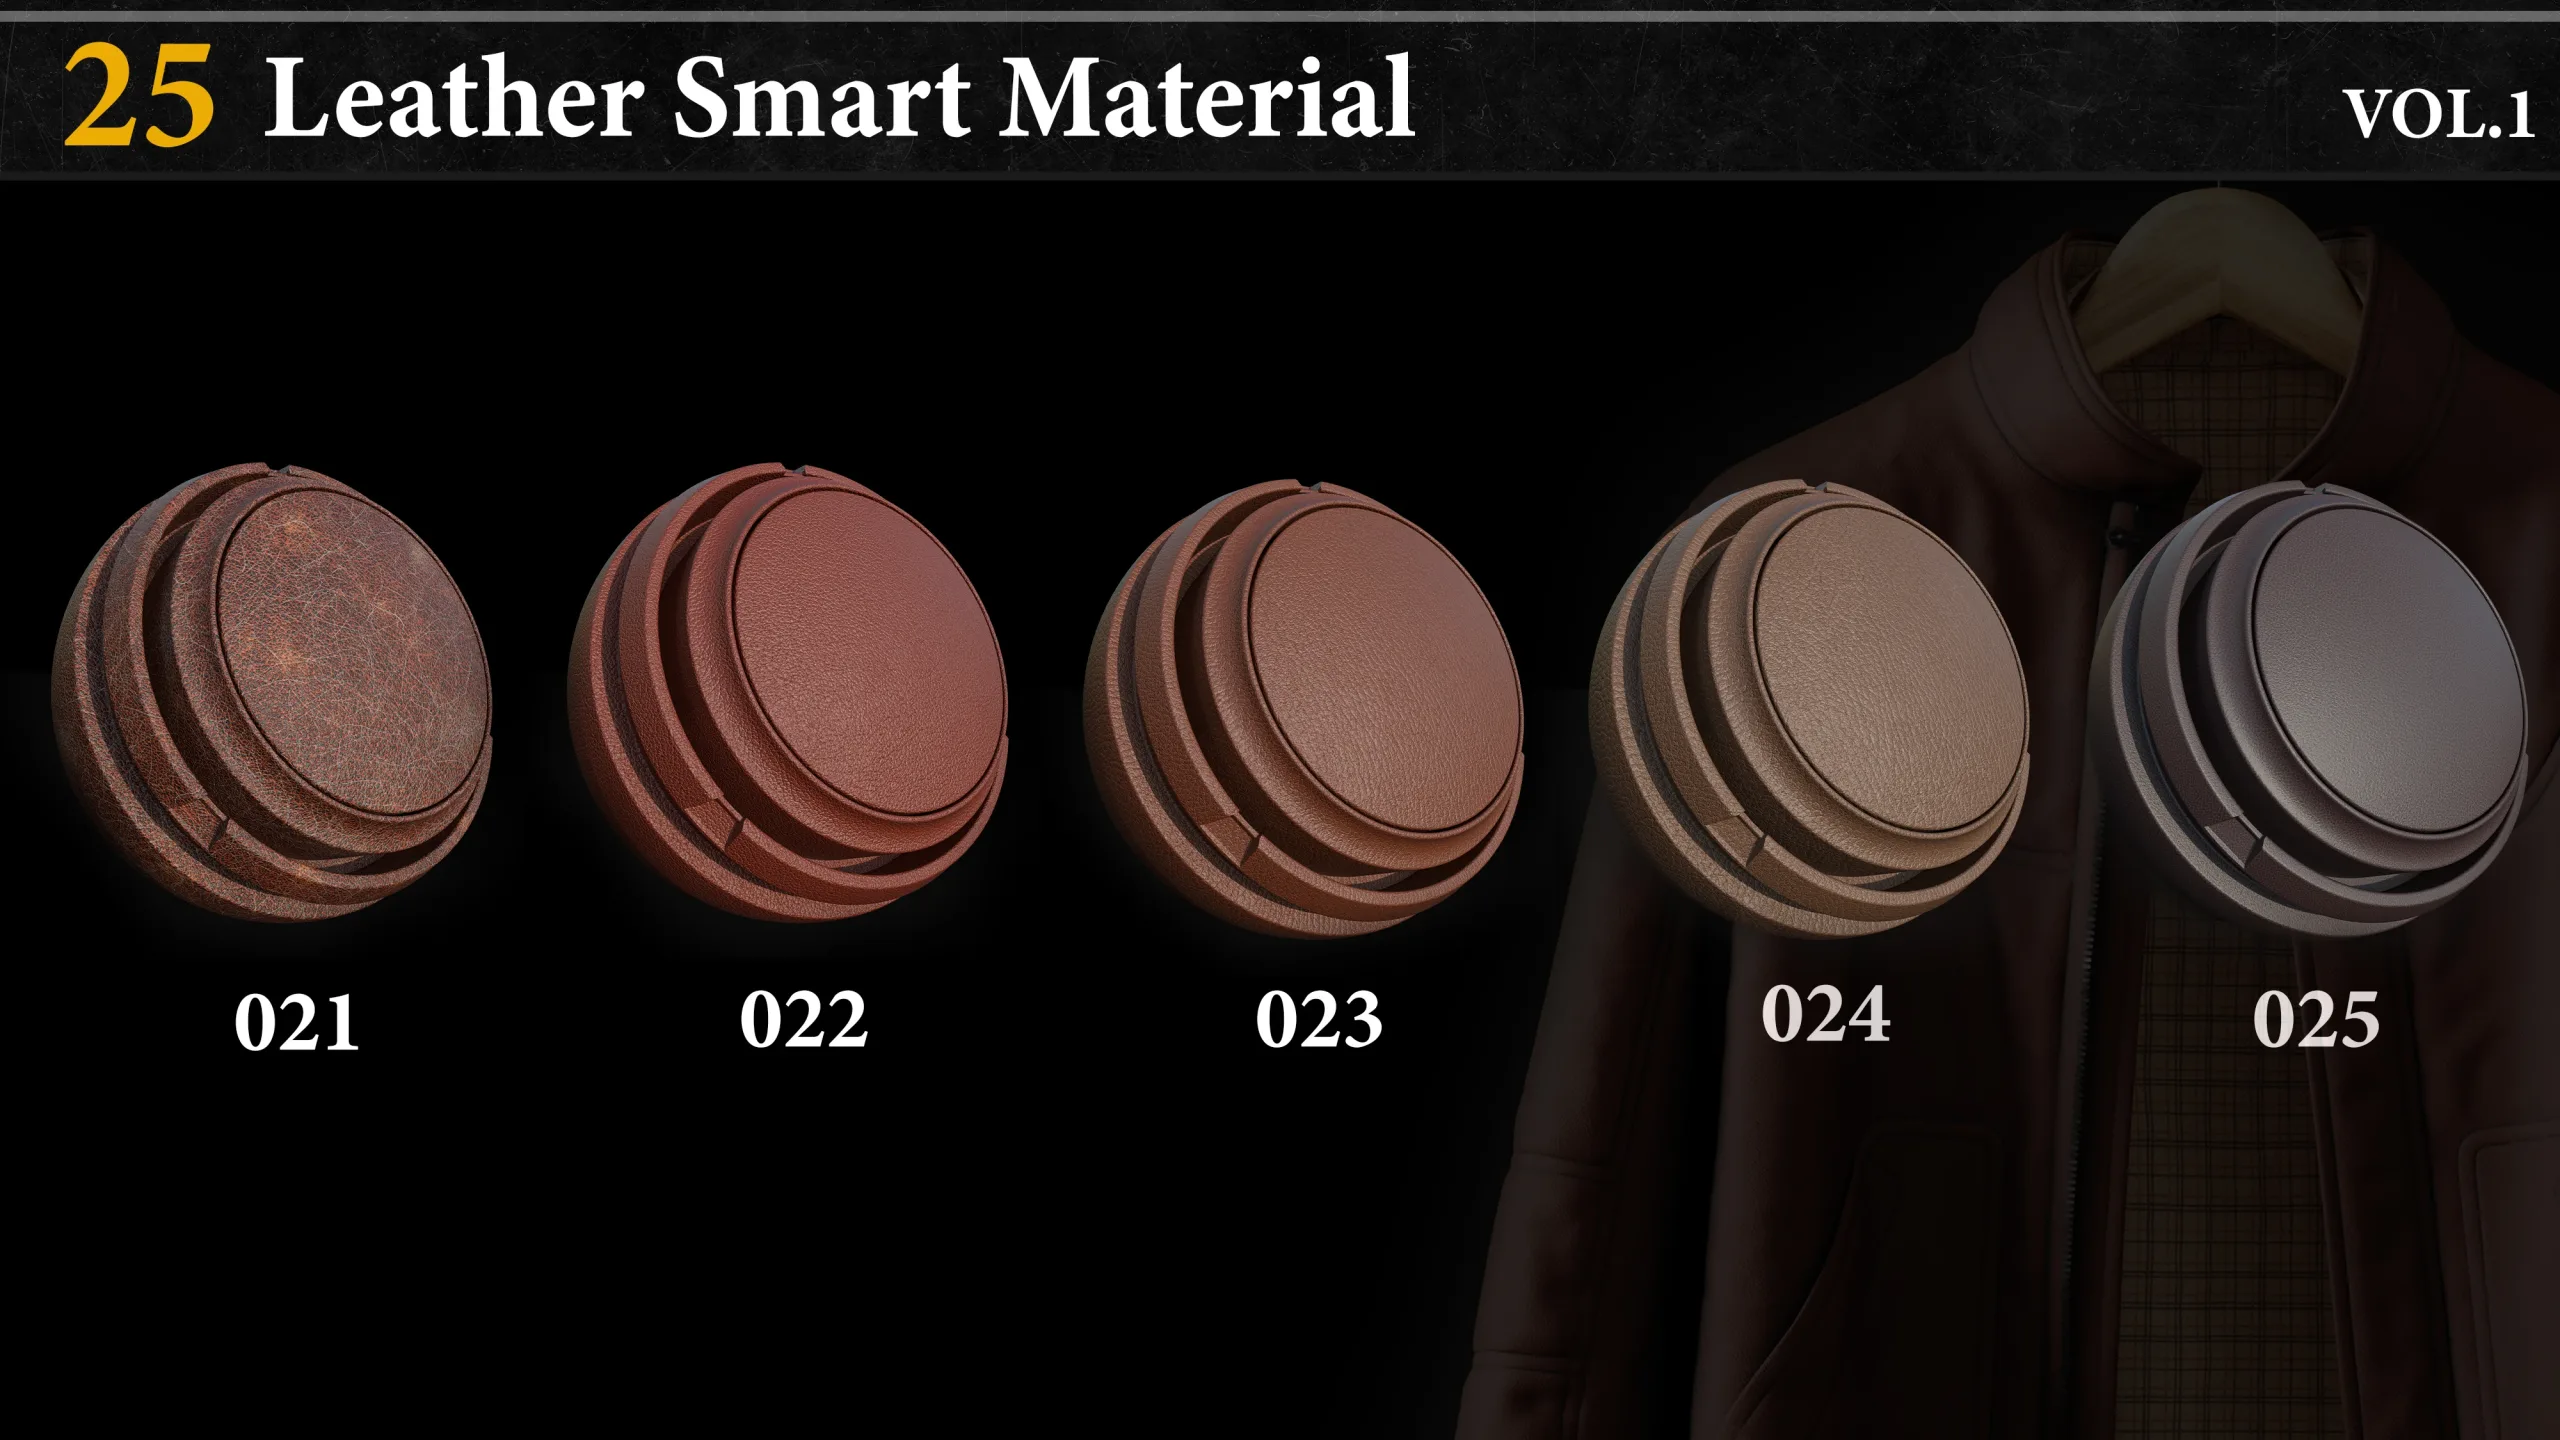 25 Leather Smart Material VOL.1